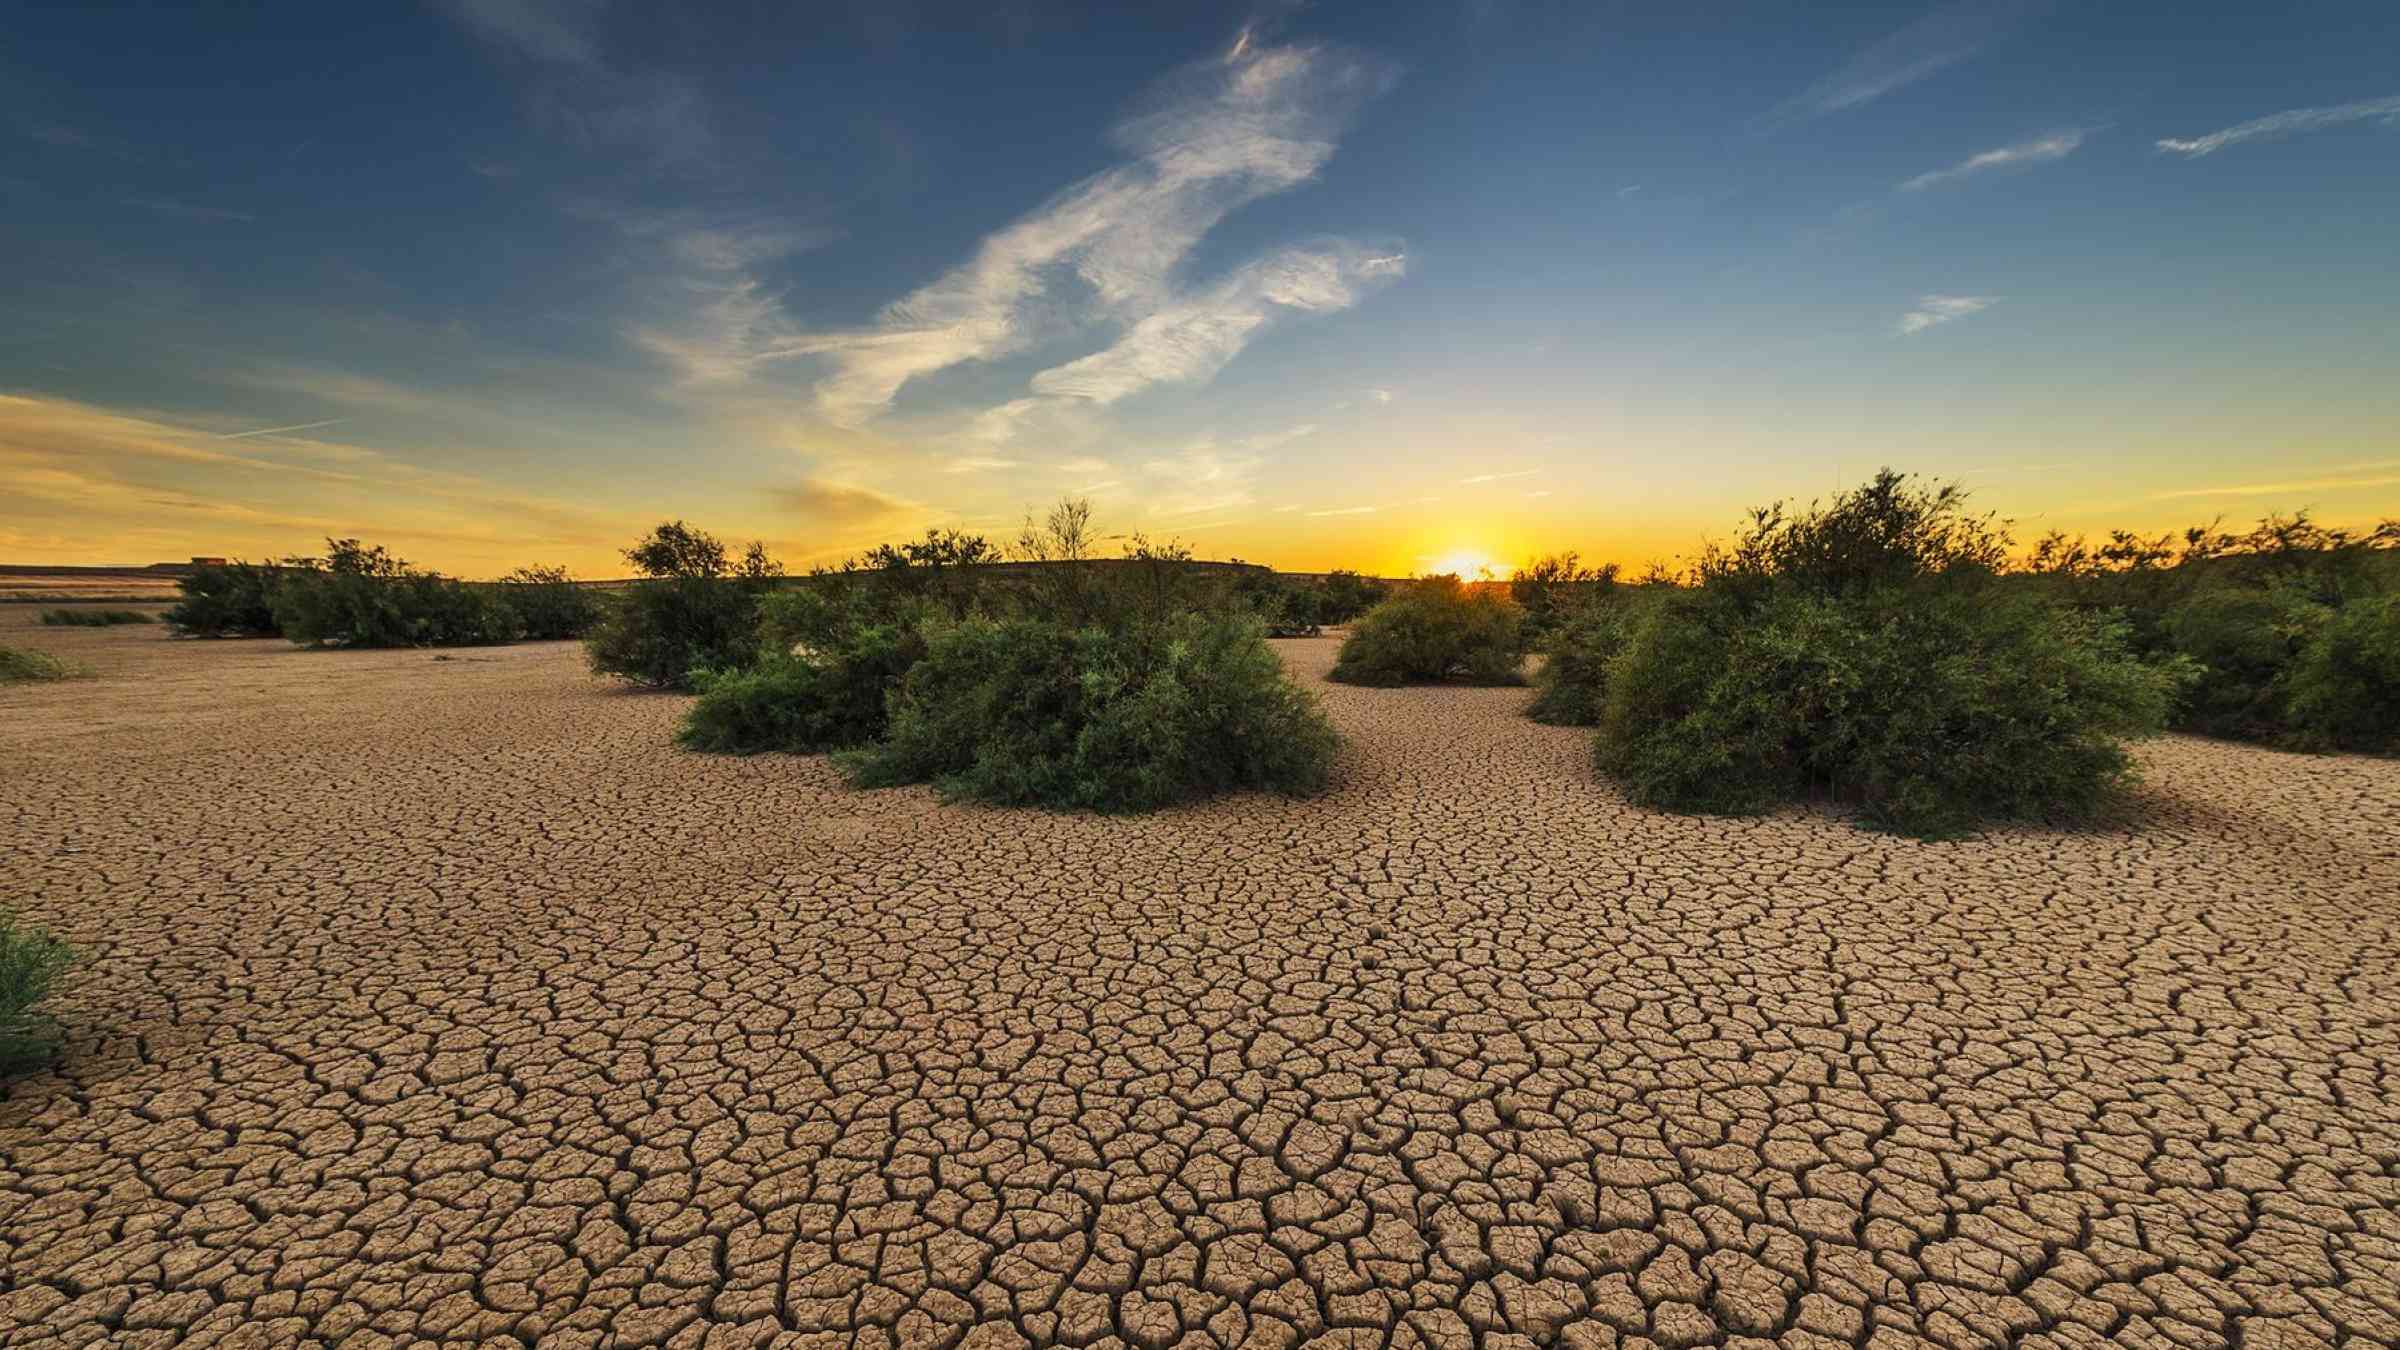 sunset at a drought stricken and arid landscape with shrubs